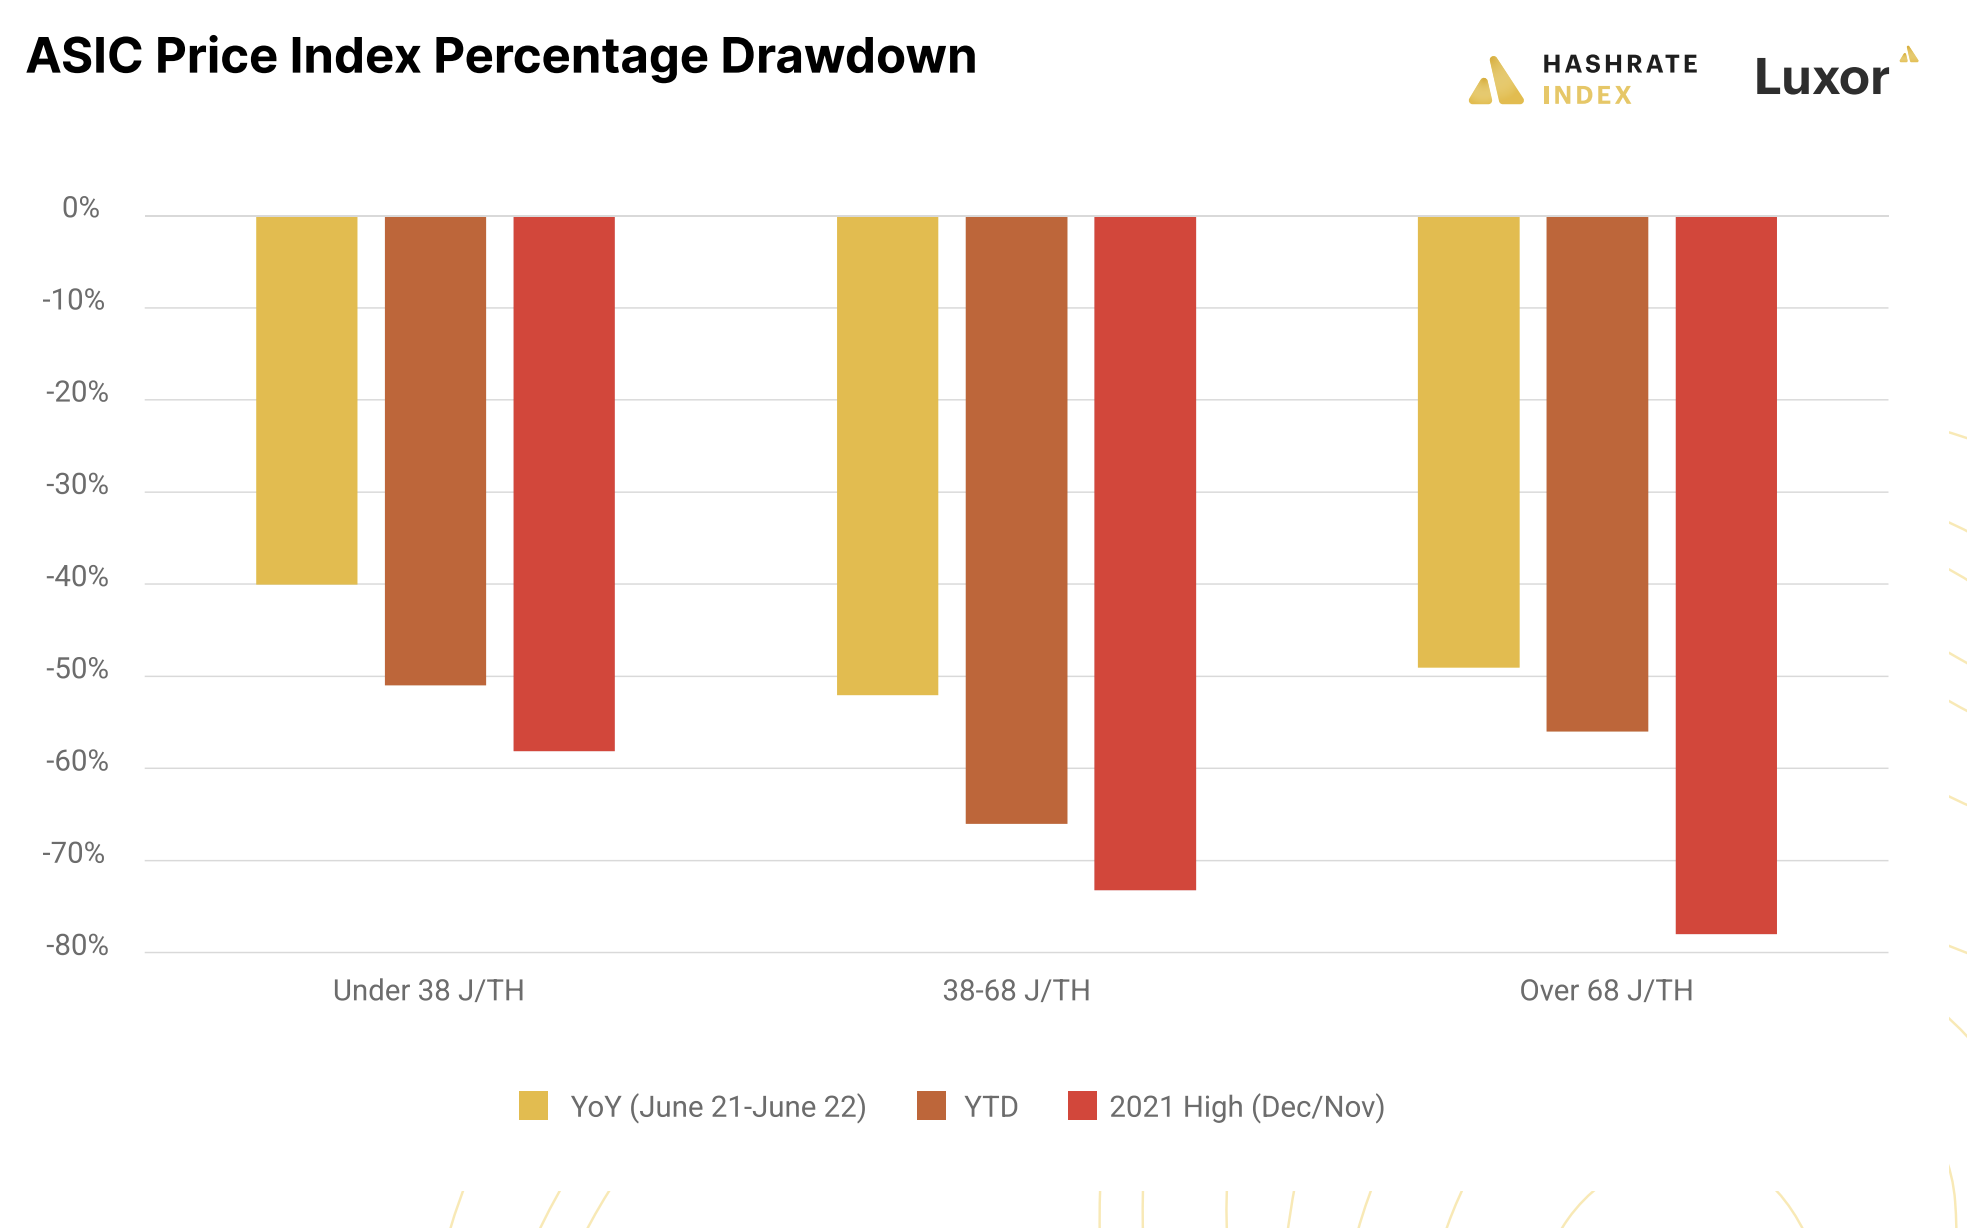 ASIC Price Index drawdowns YoY, YTD, and from 2021 high | July 2022